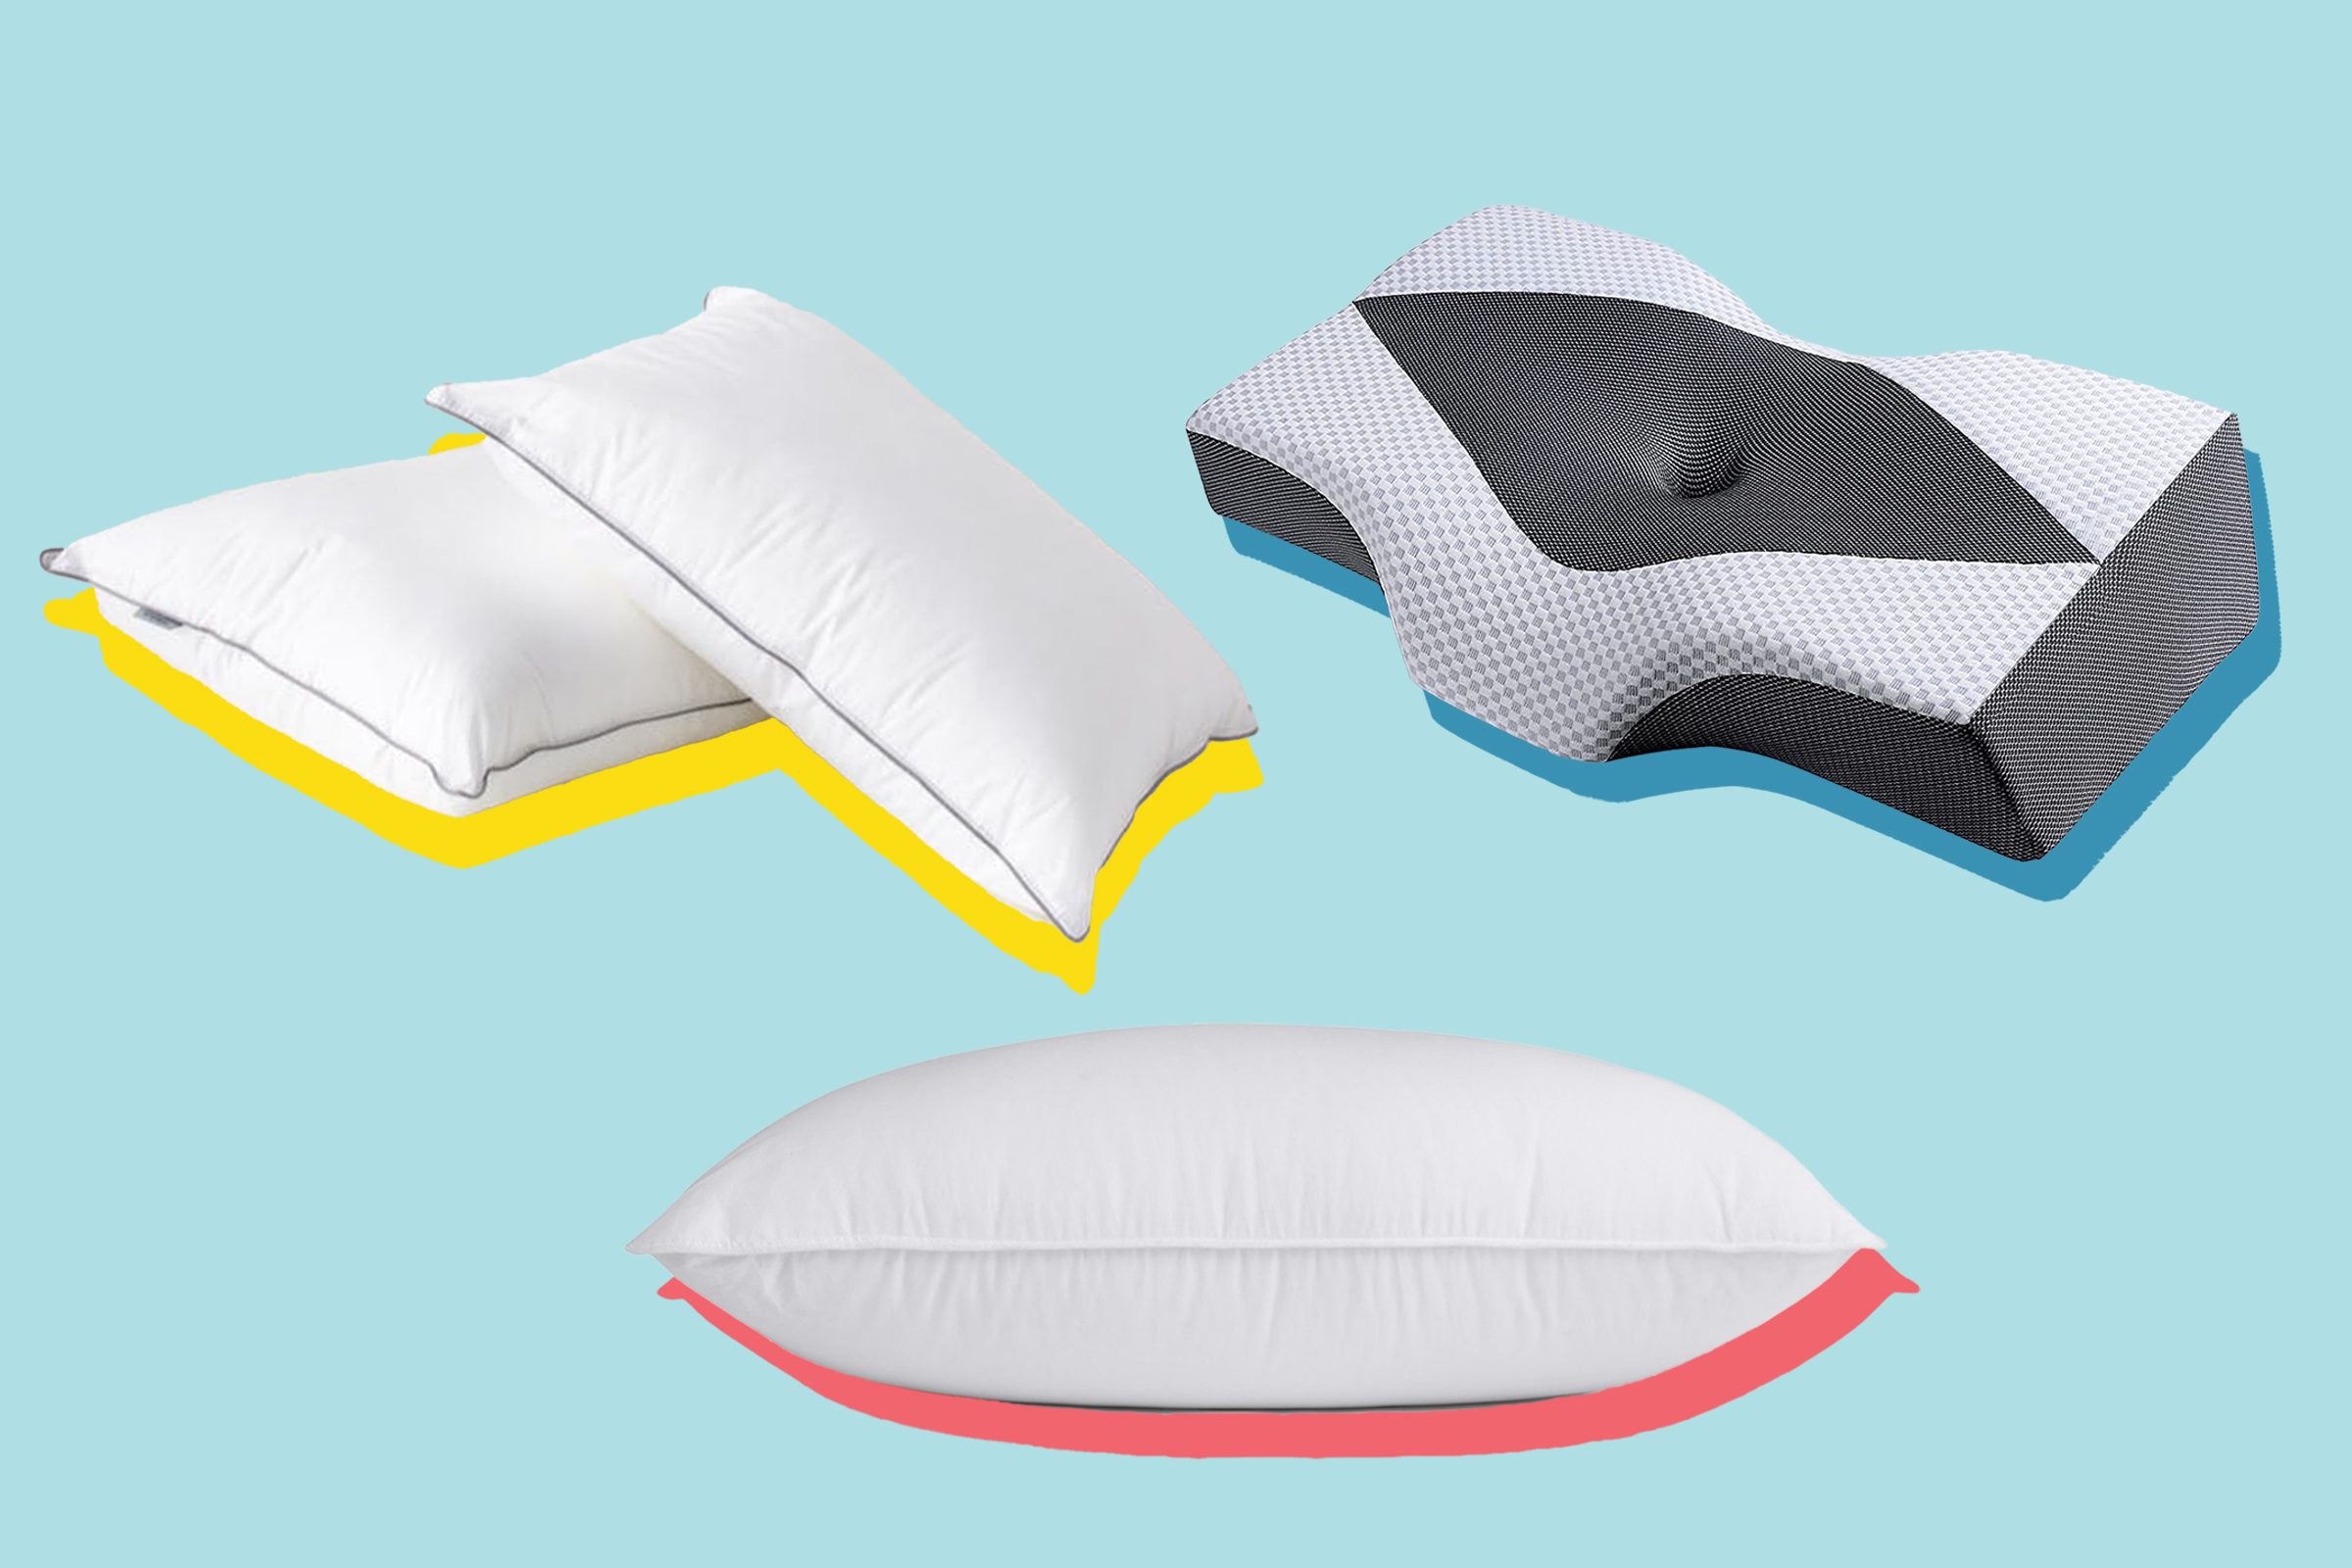 A doctor reveals how to pick a pillow to banish back pain